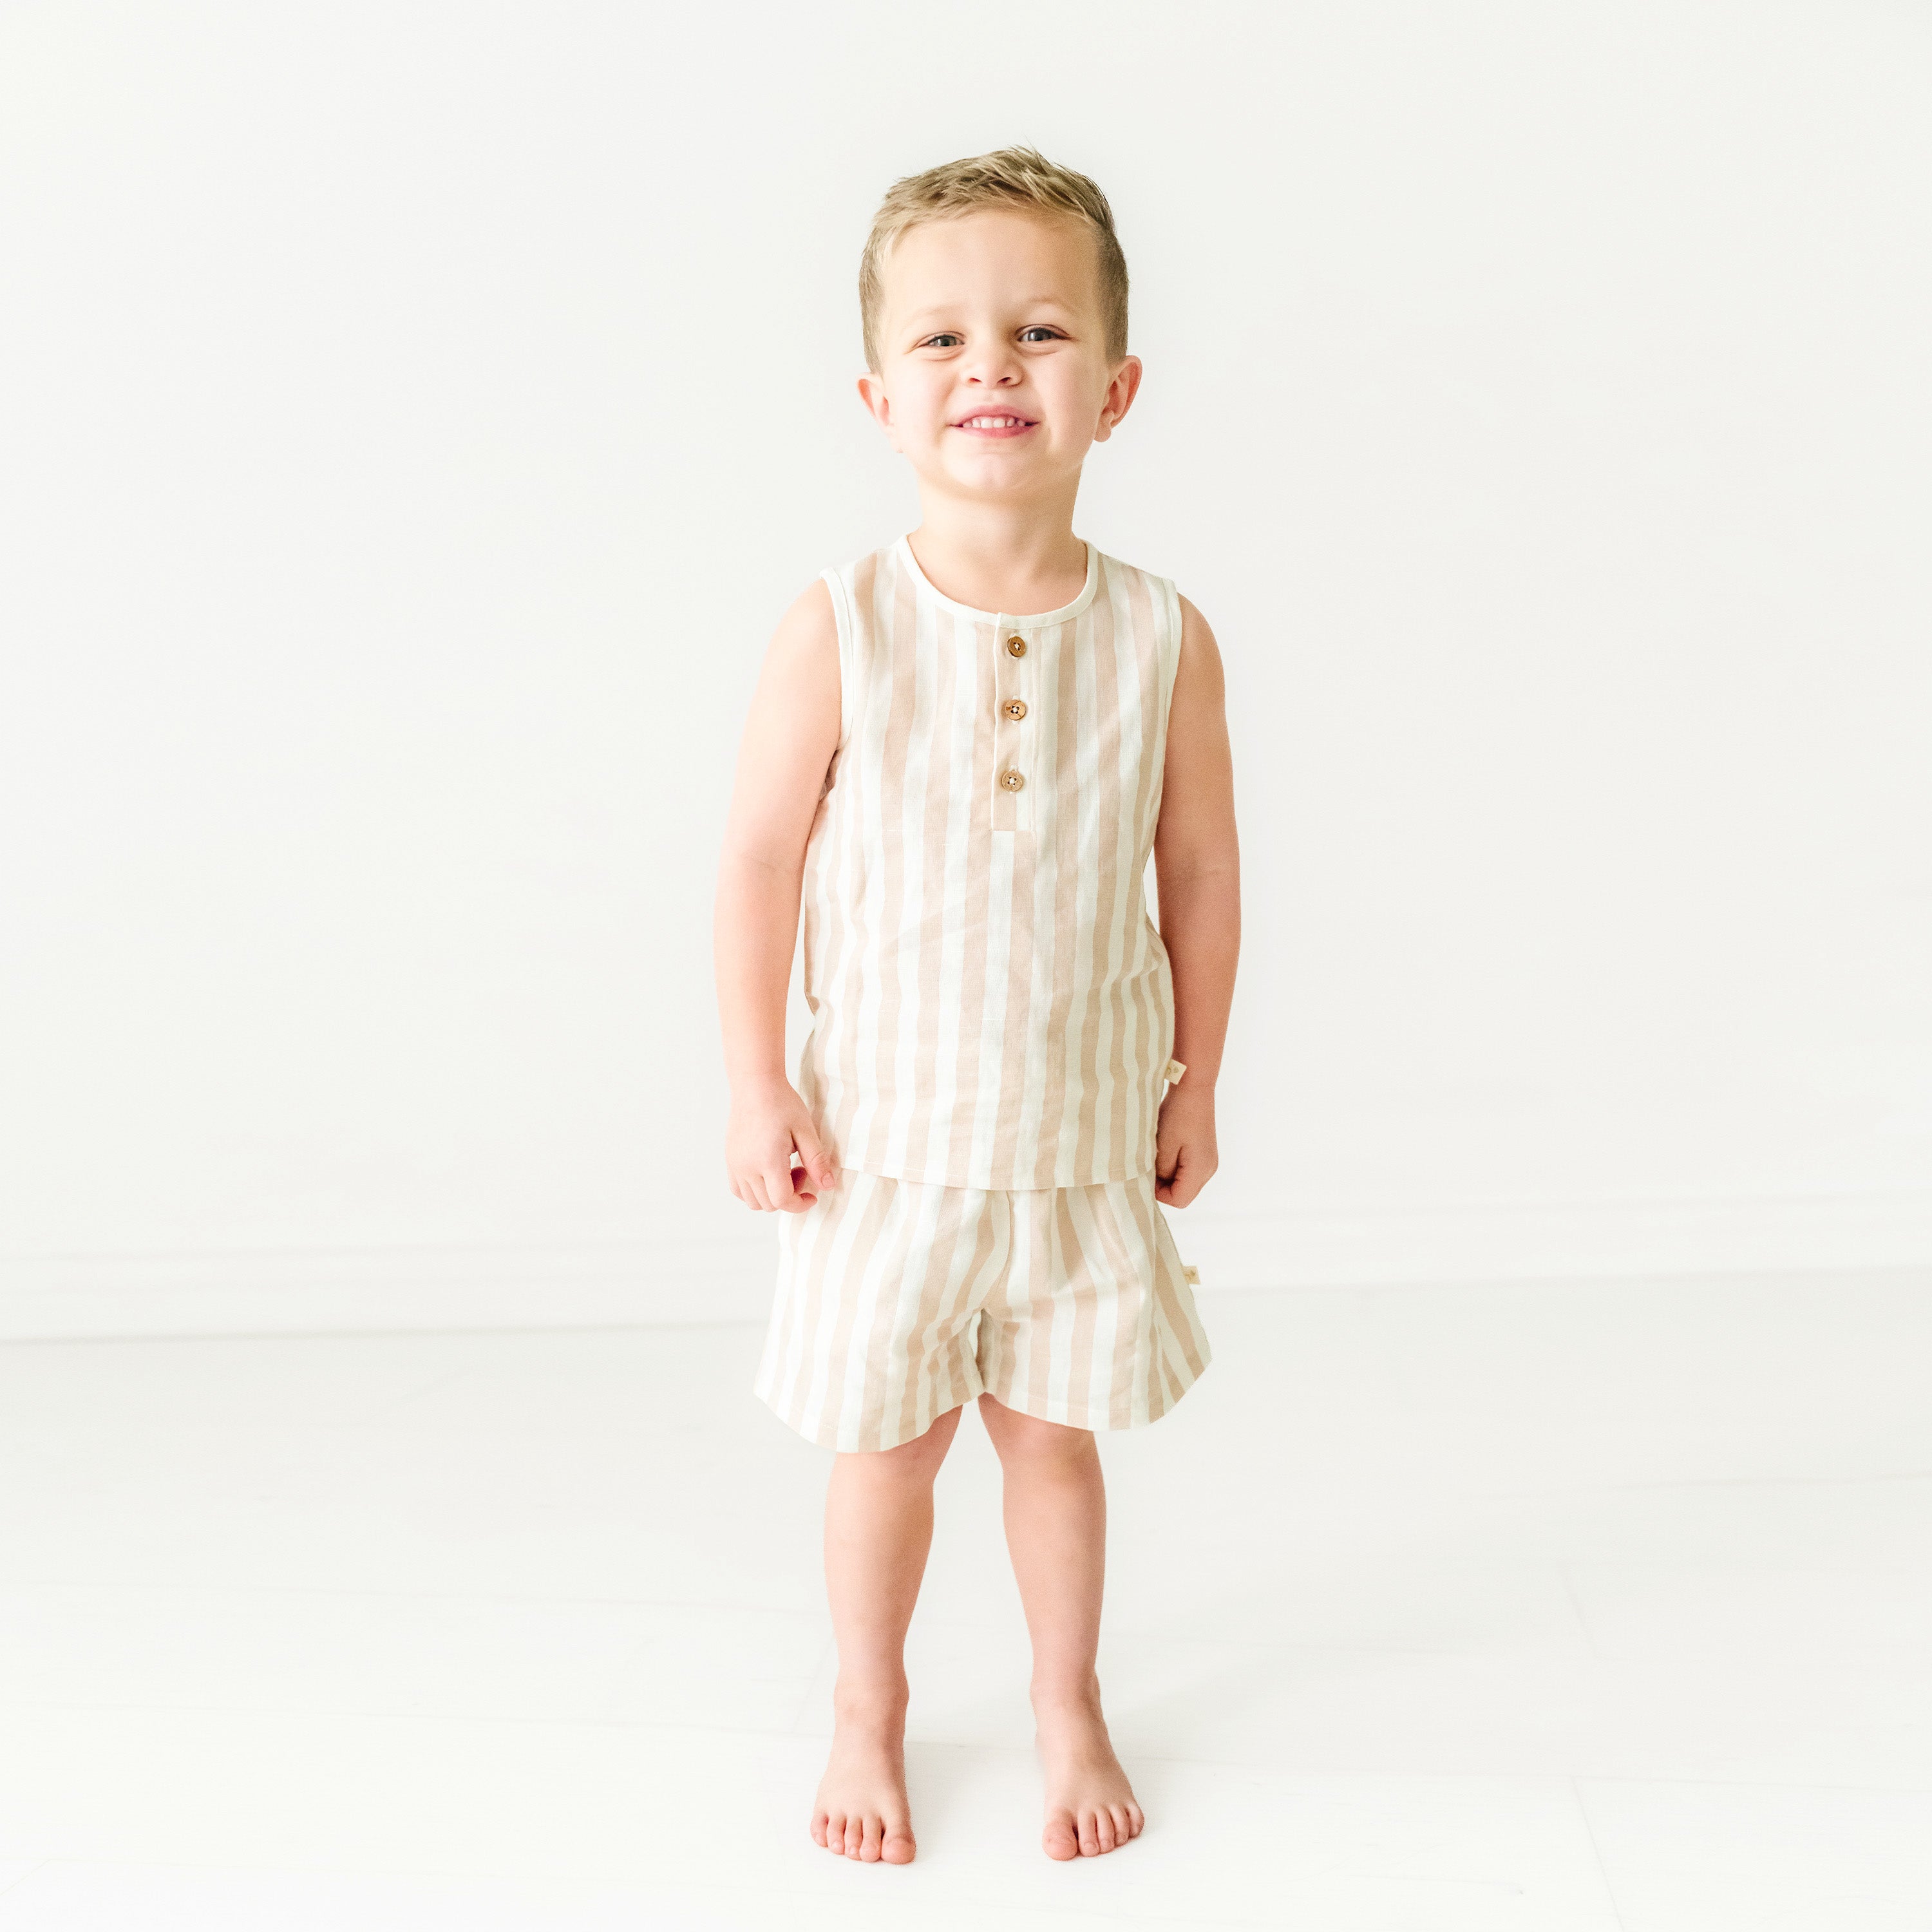 A young toddler smiles while standing barefoot, dressed in an Organic Linen Tank and Shorts Set in Beige Stripes by Makemake Organics in a bright, minimalist setting.